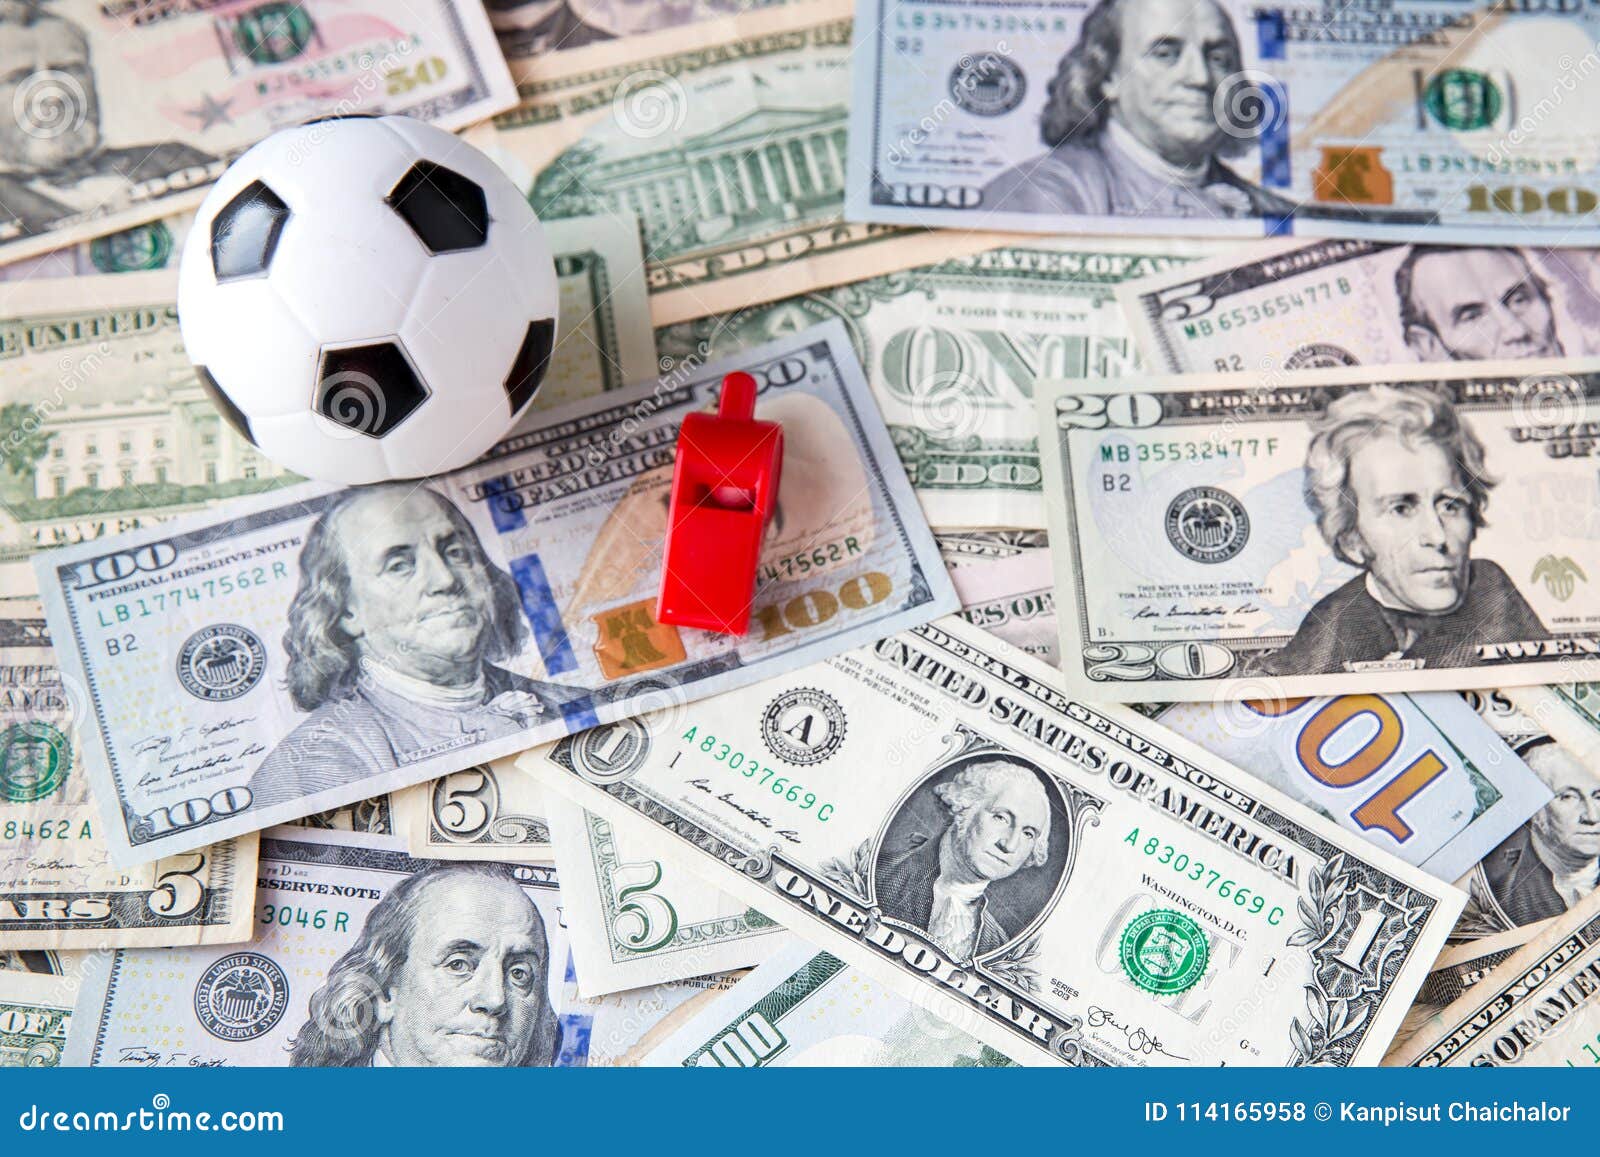 soccer ball over a lot of money. corruption football game. betting and gambling concept.